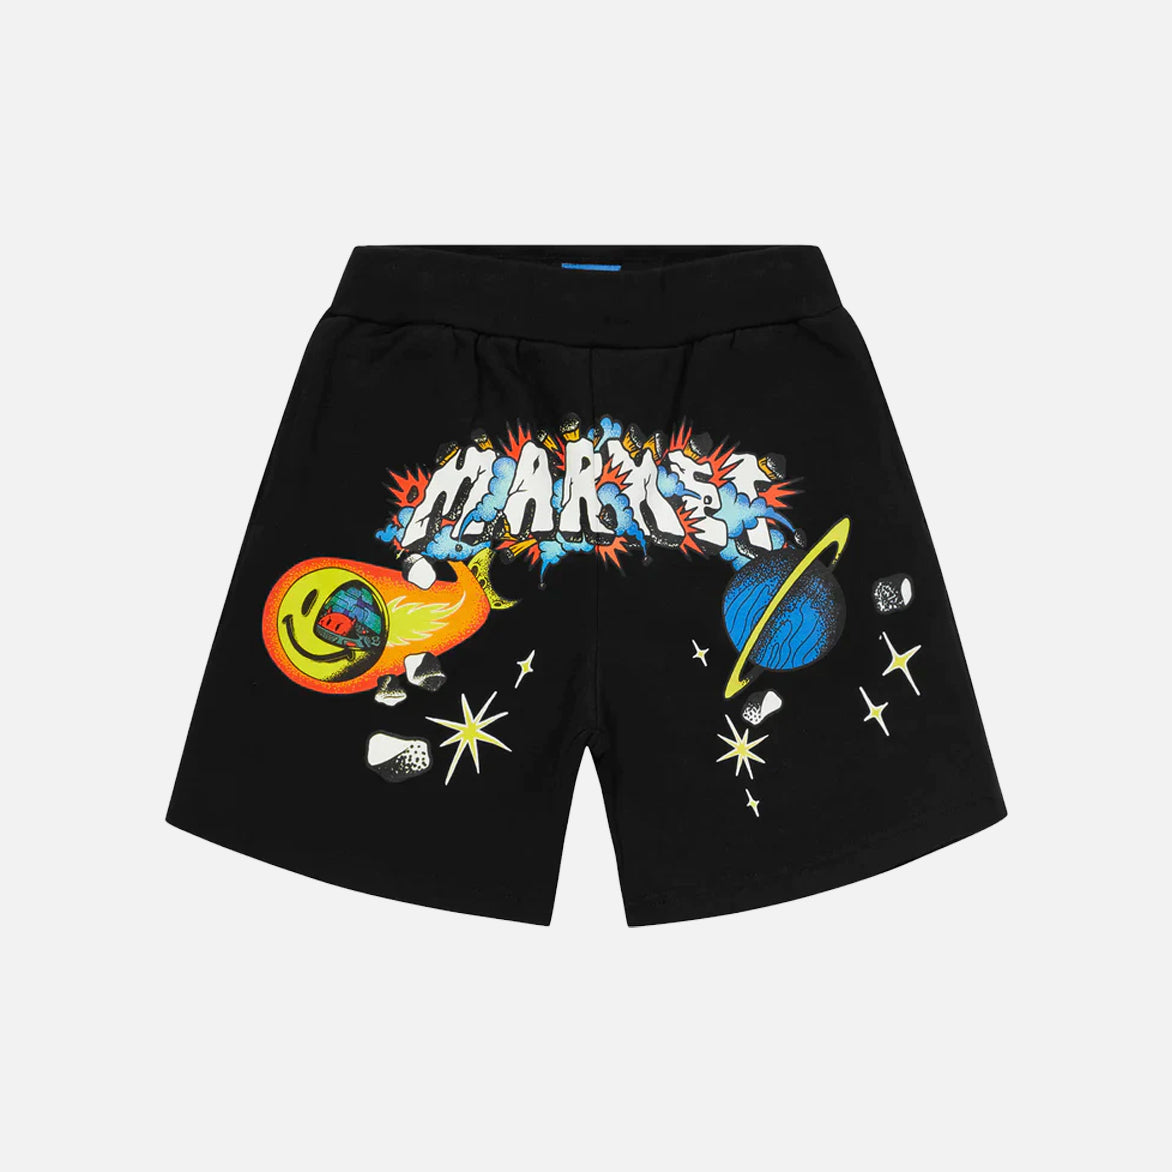 SMILEY CONFLICTED SHORTS - BLACK